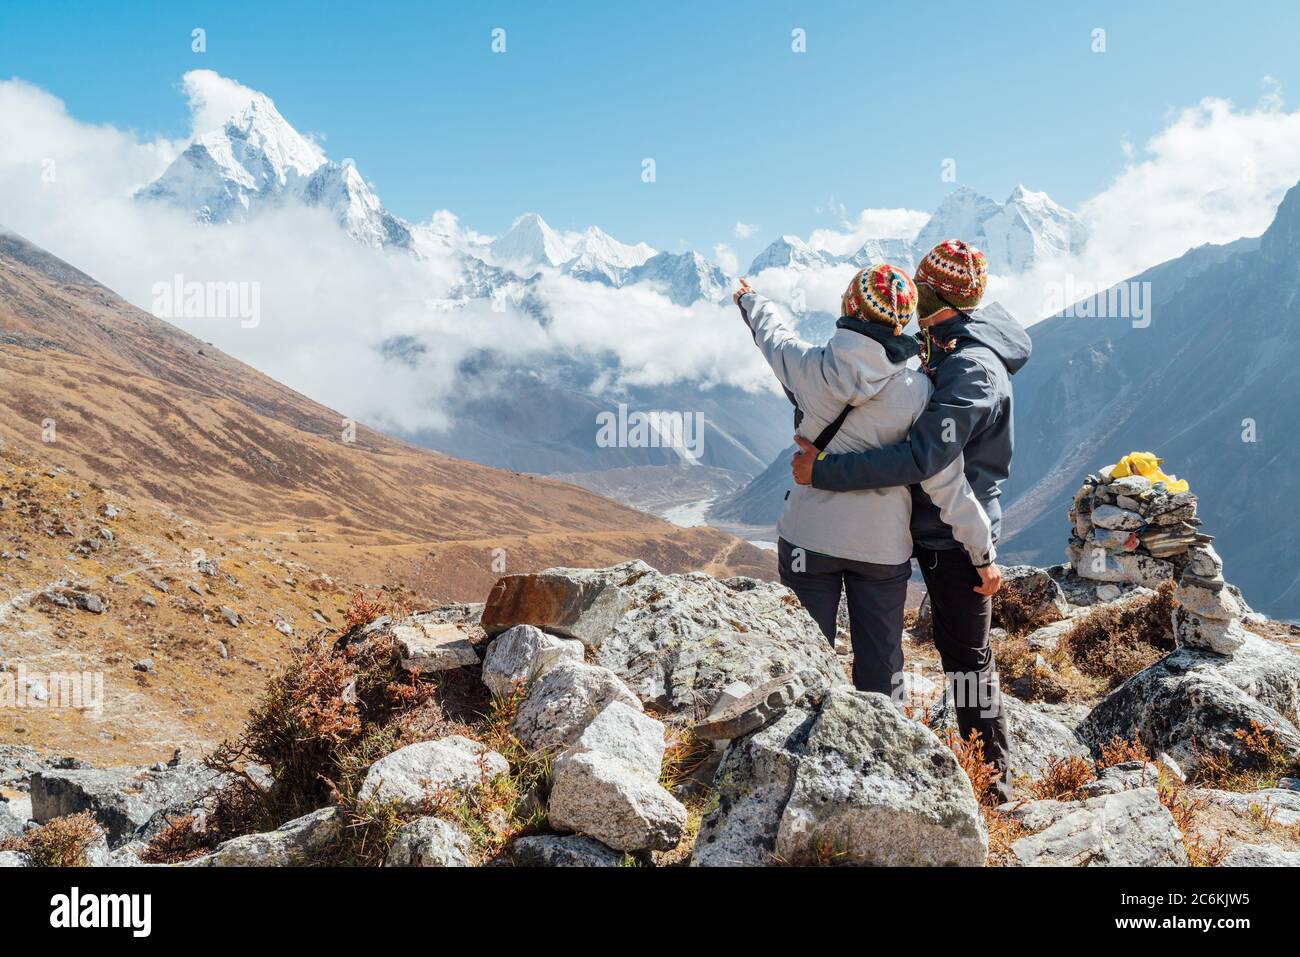 Couple having a rest on Everest Base Camp trekking route near Dughla 4620m. Backpackers left Backpacks, embracing and enjoying valley view with Ama Da Stock Photo